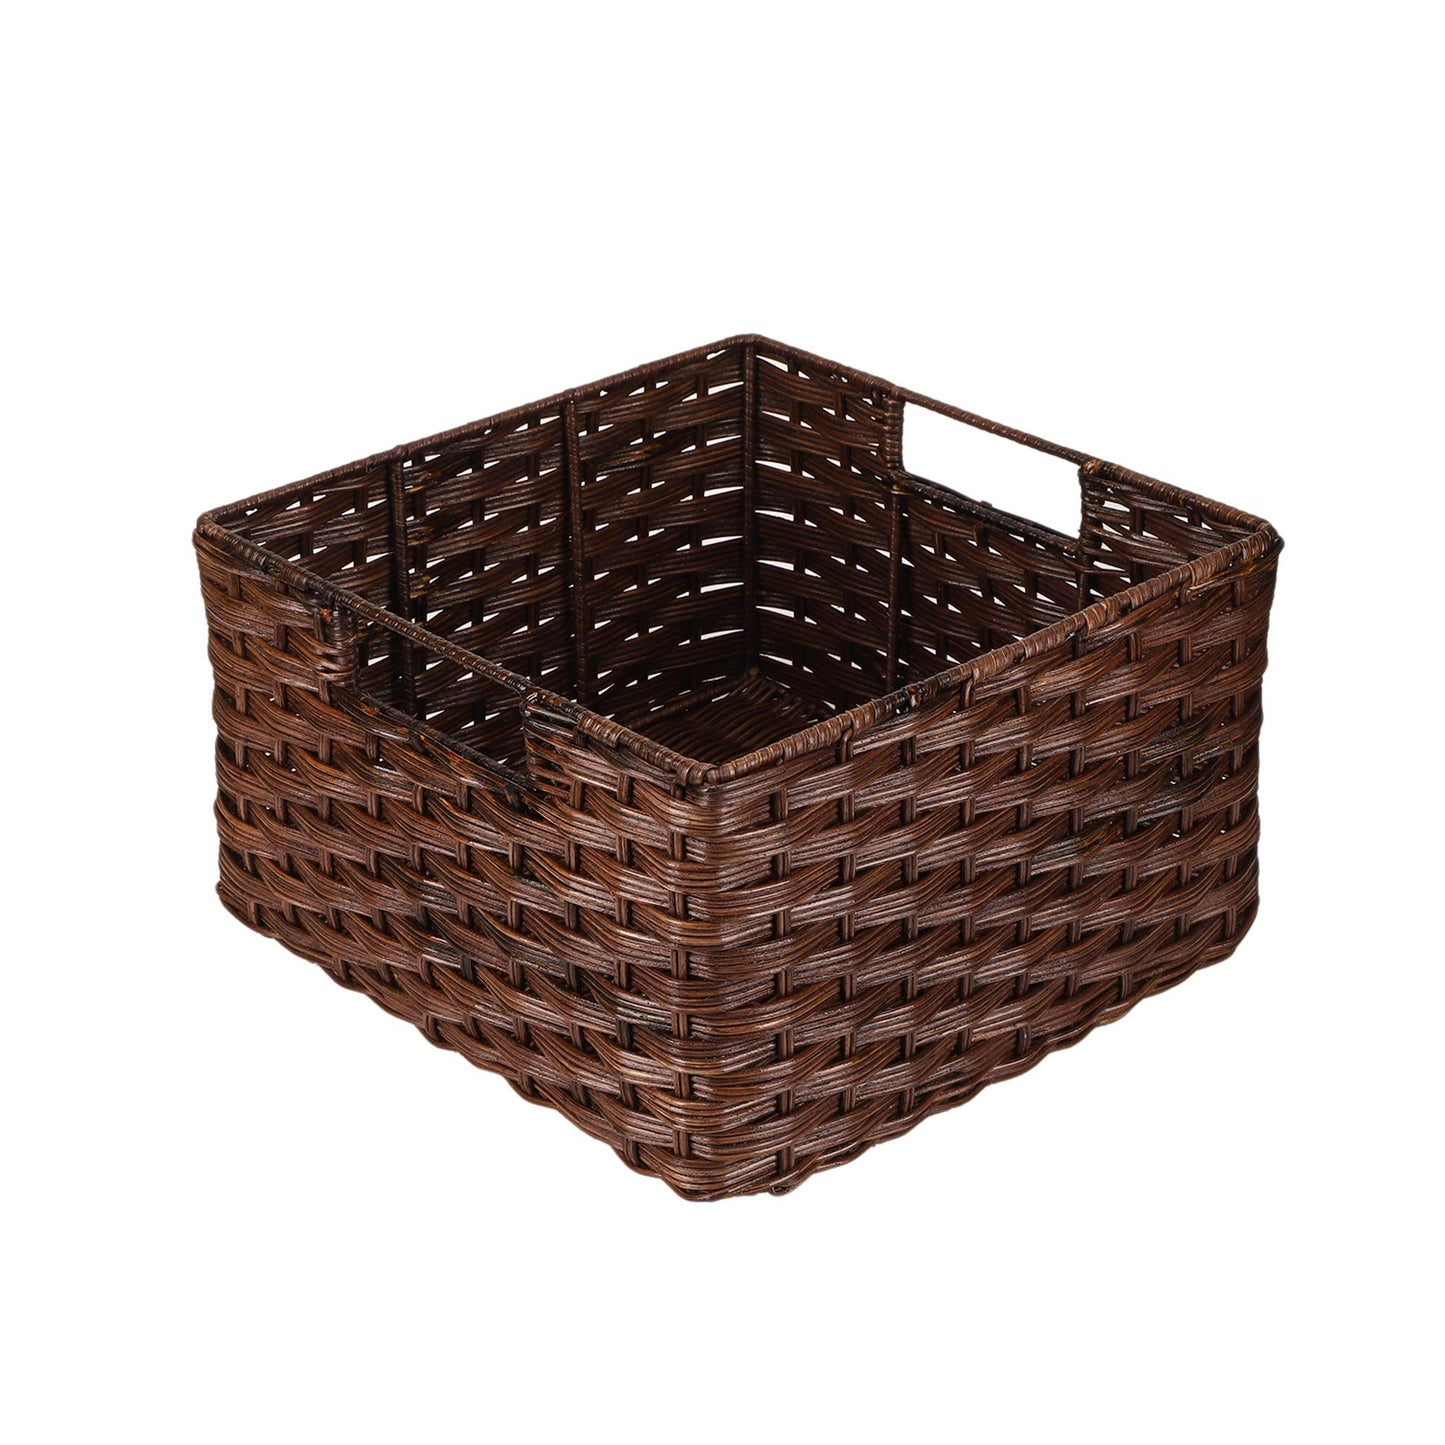 AKWAY Handcrafted Wicker Storage Container Basket with Handles for Toiletry Cosmetic, Towels, Toys, Bathroom, Bedroom, Wardrobe (Antique Black) - Akway